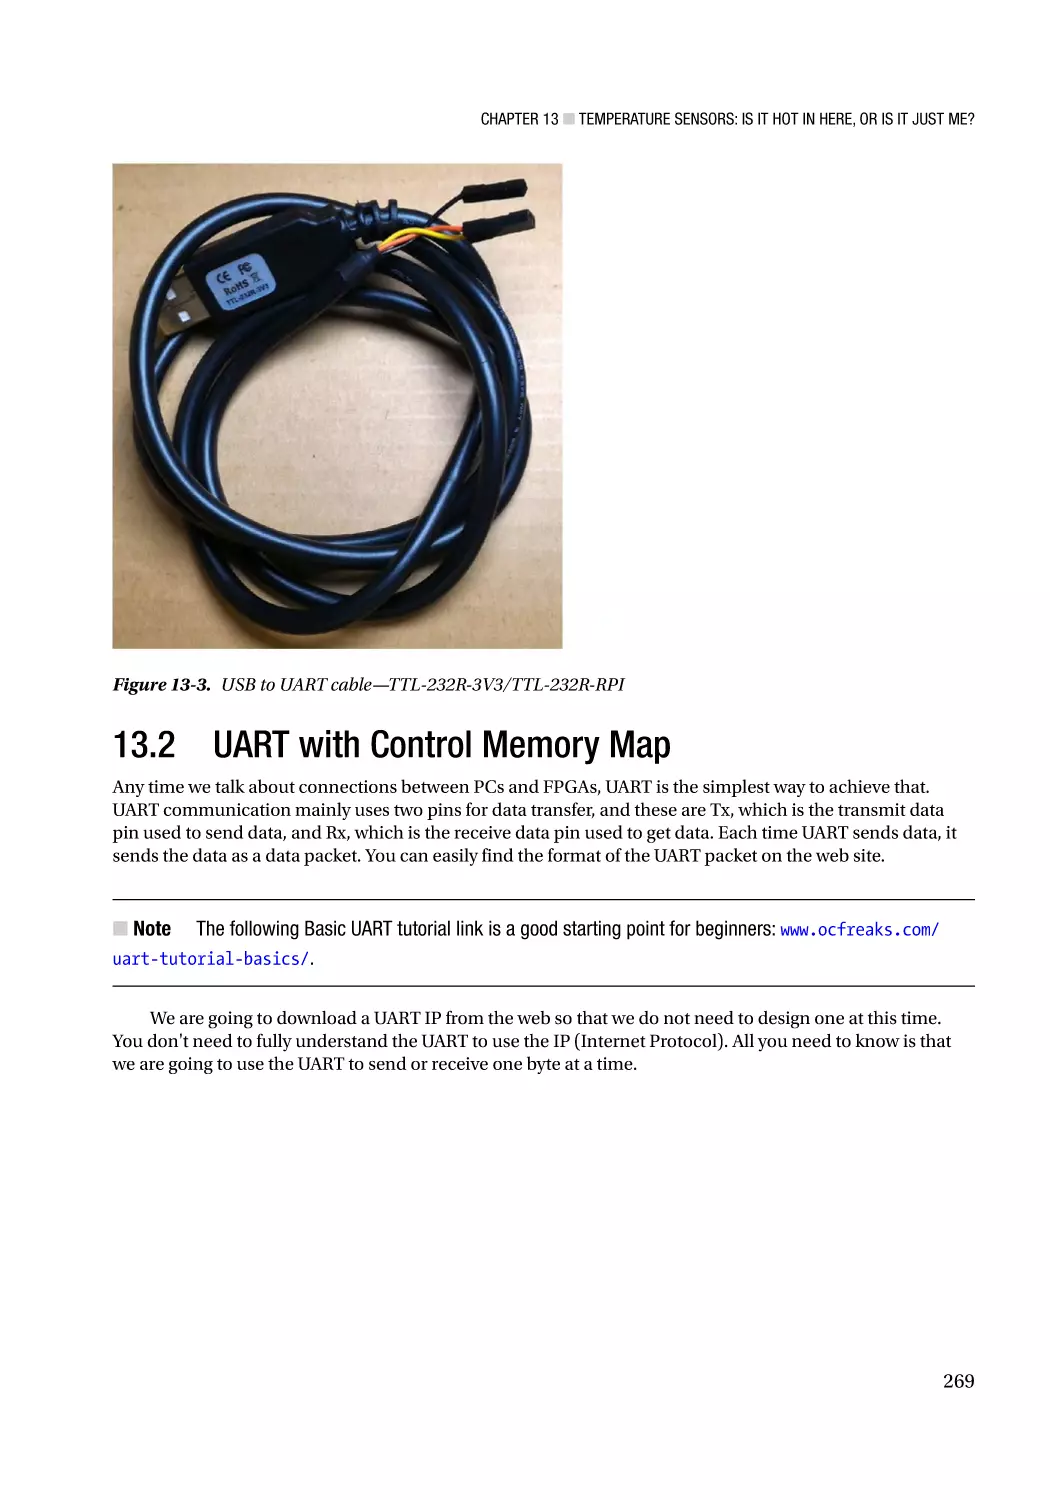 13.2 UART with Control Memory Map